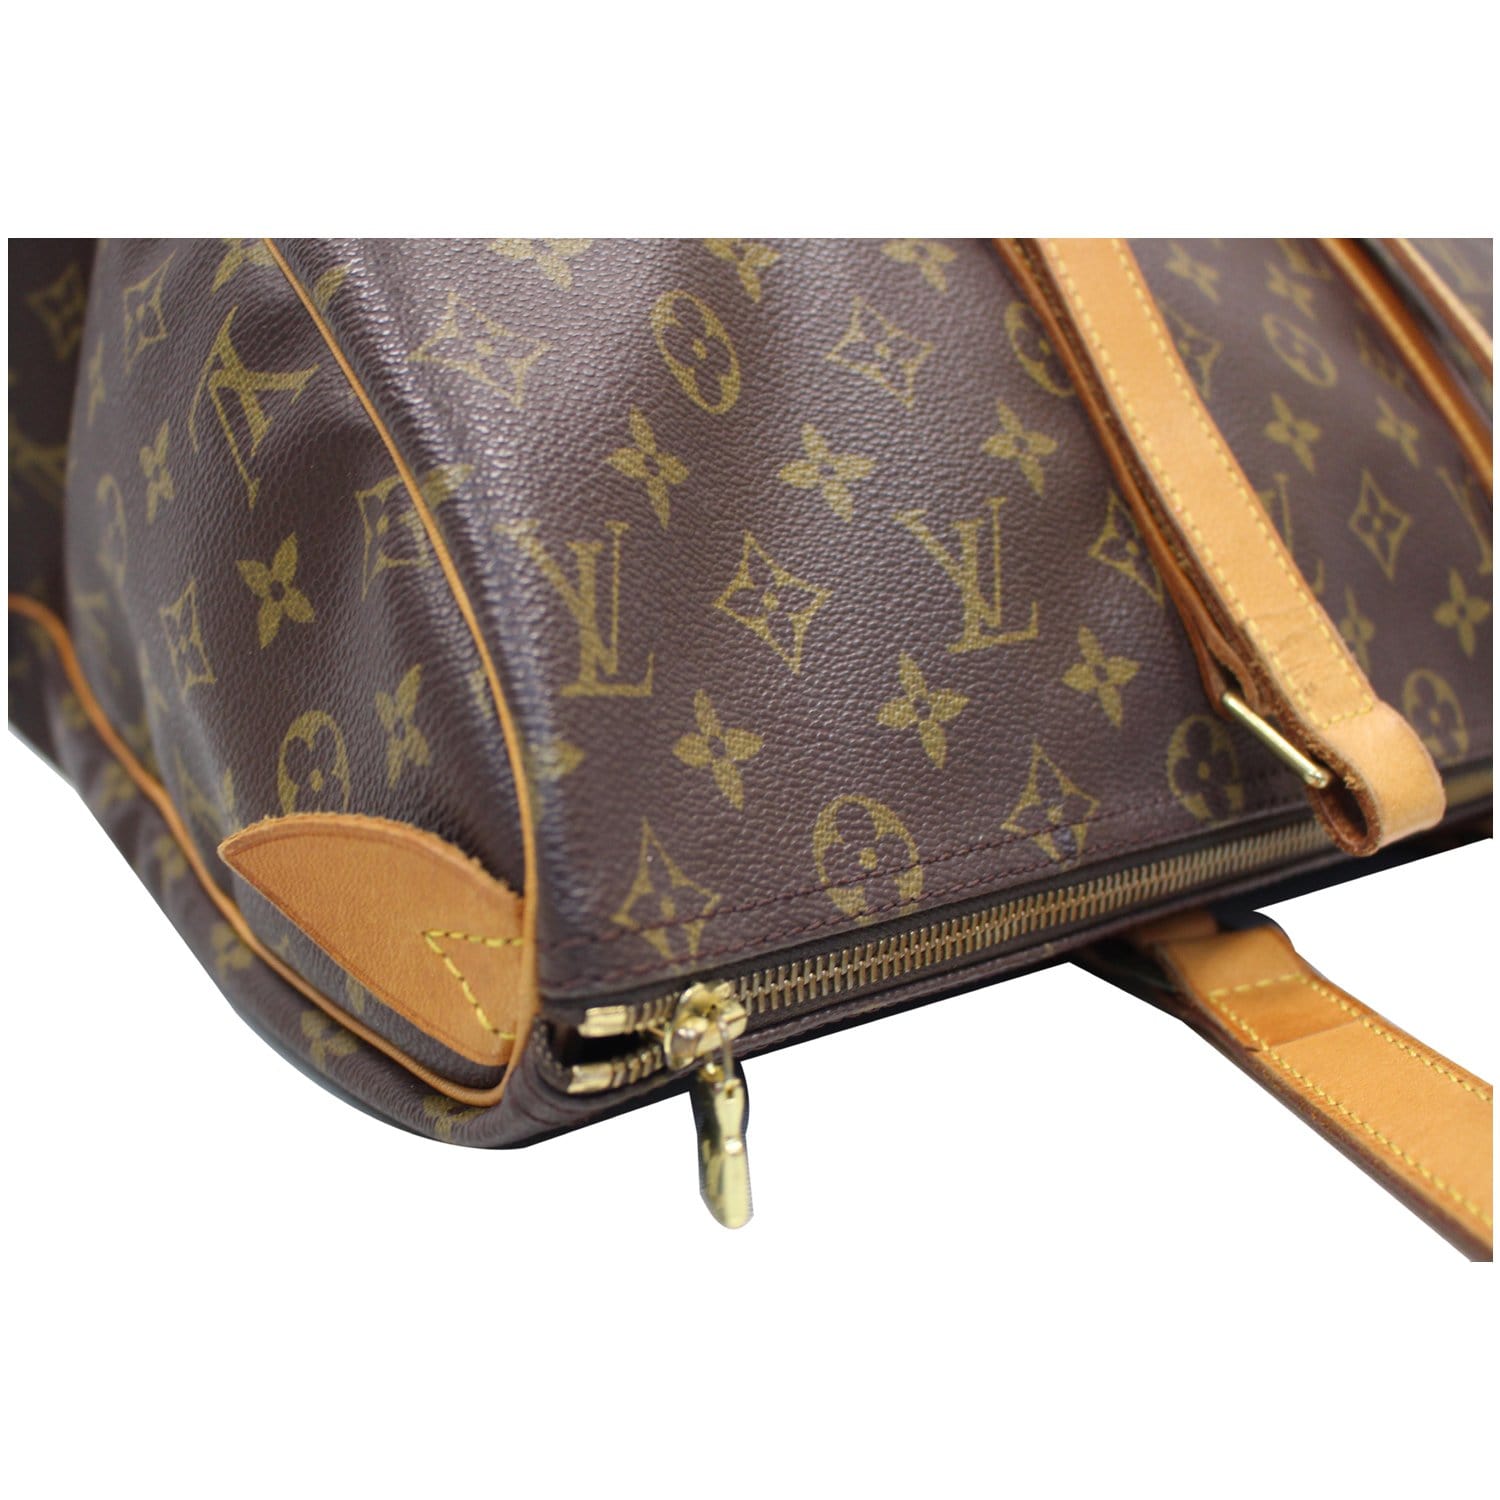 Pre Owned/Louis Vuitton/Lv/Babylon/Tote and 50 similar items